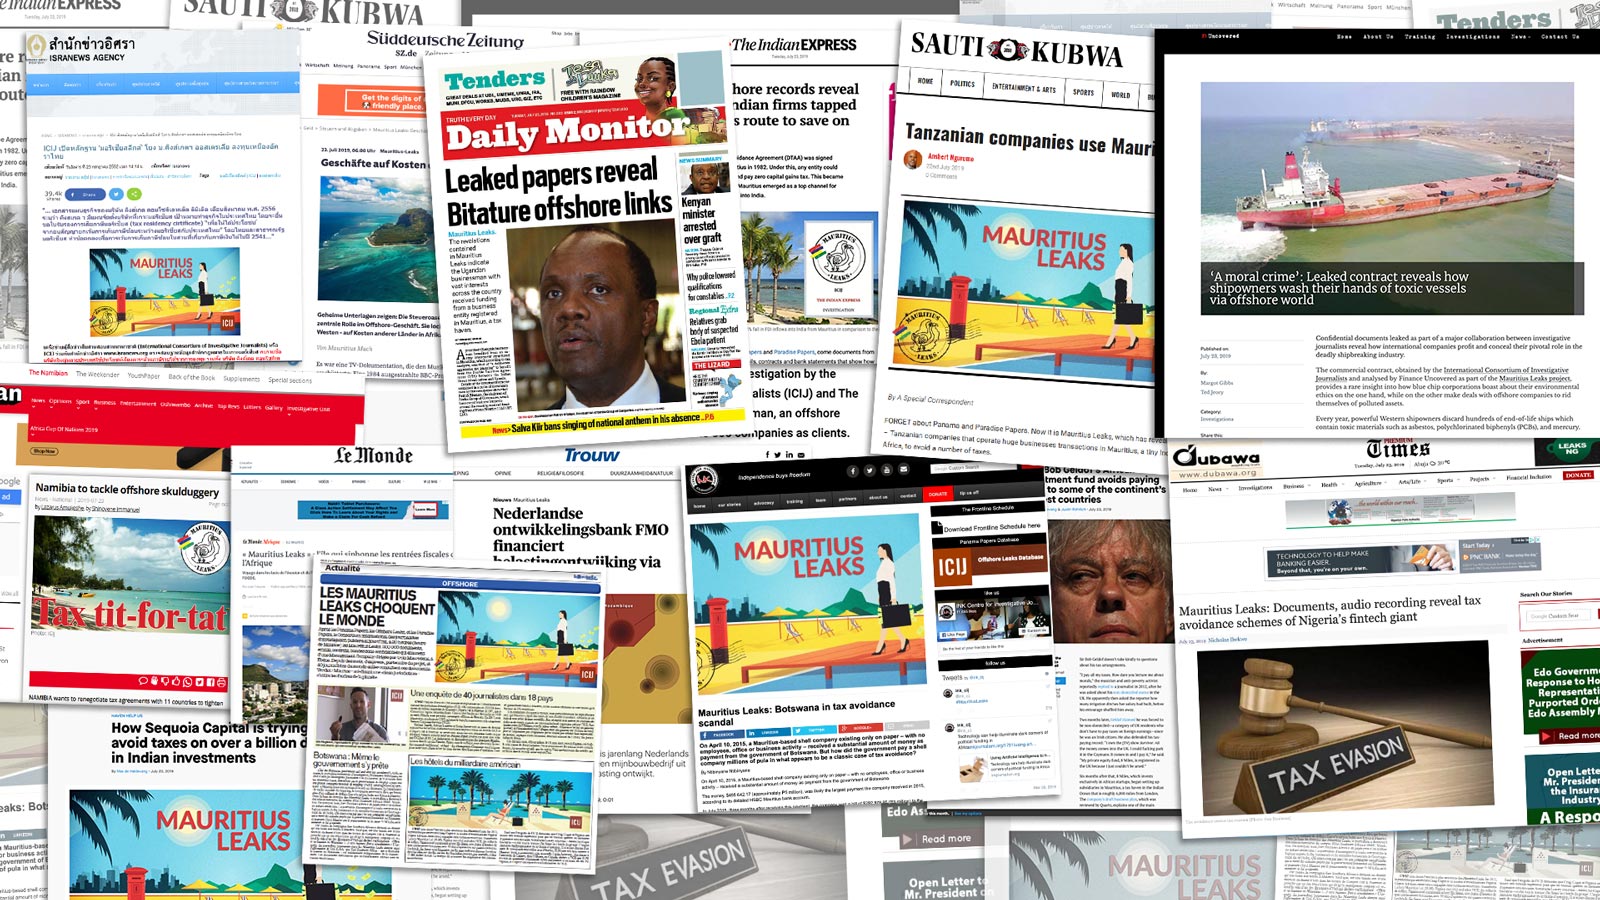 Mauritius Leaks front pages